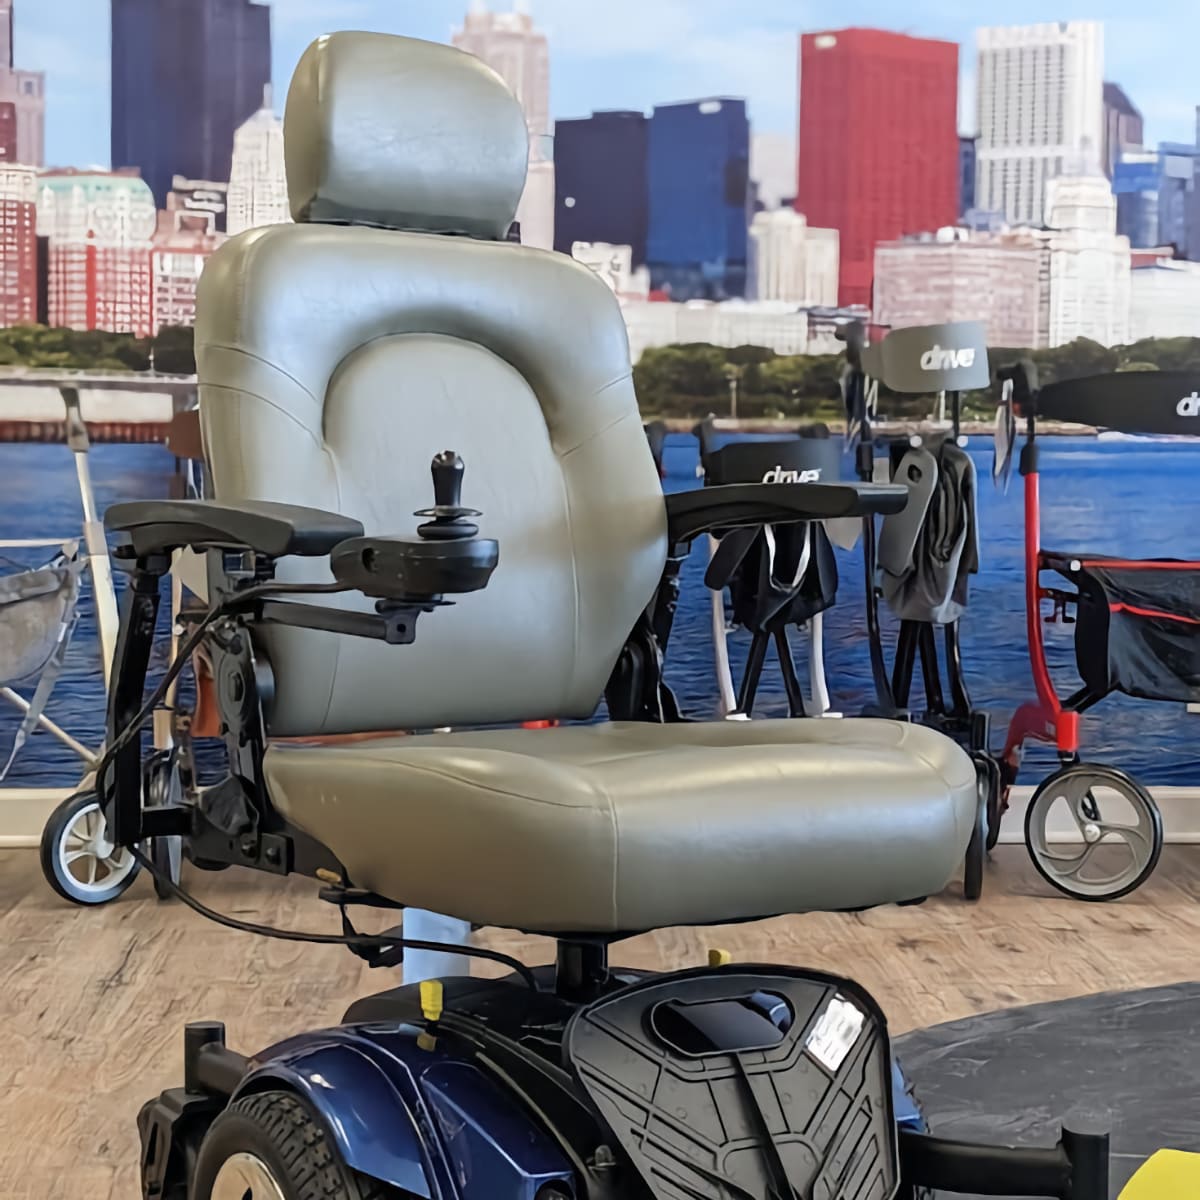 Used Golden Compass Sport power wheelchair with blue accents in Midwest Mobility showroom